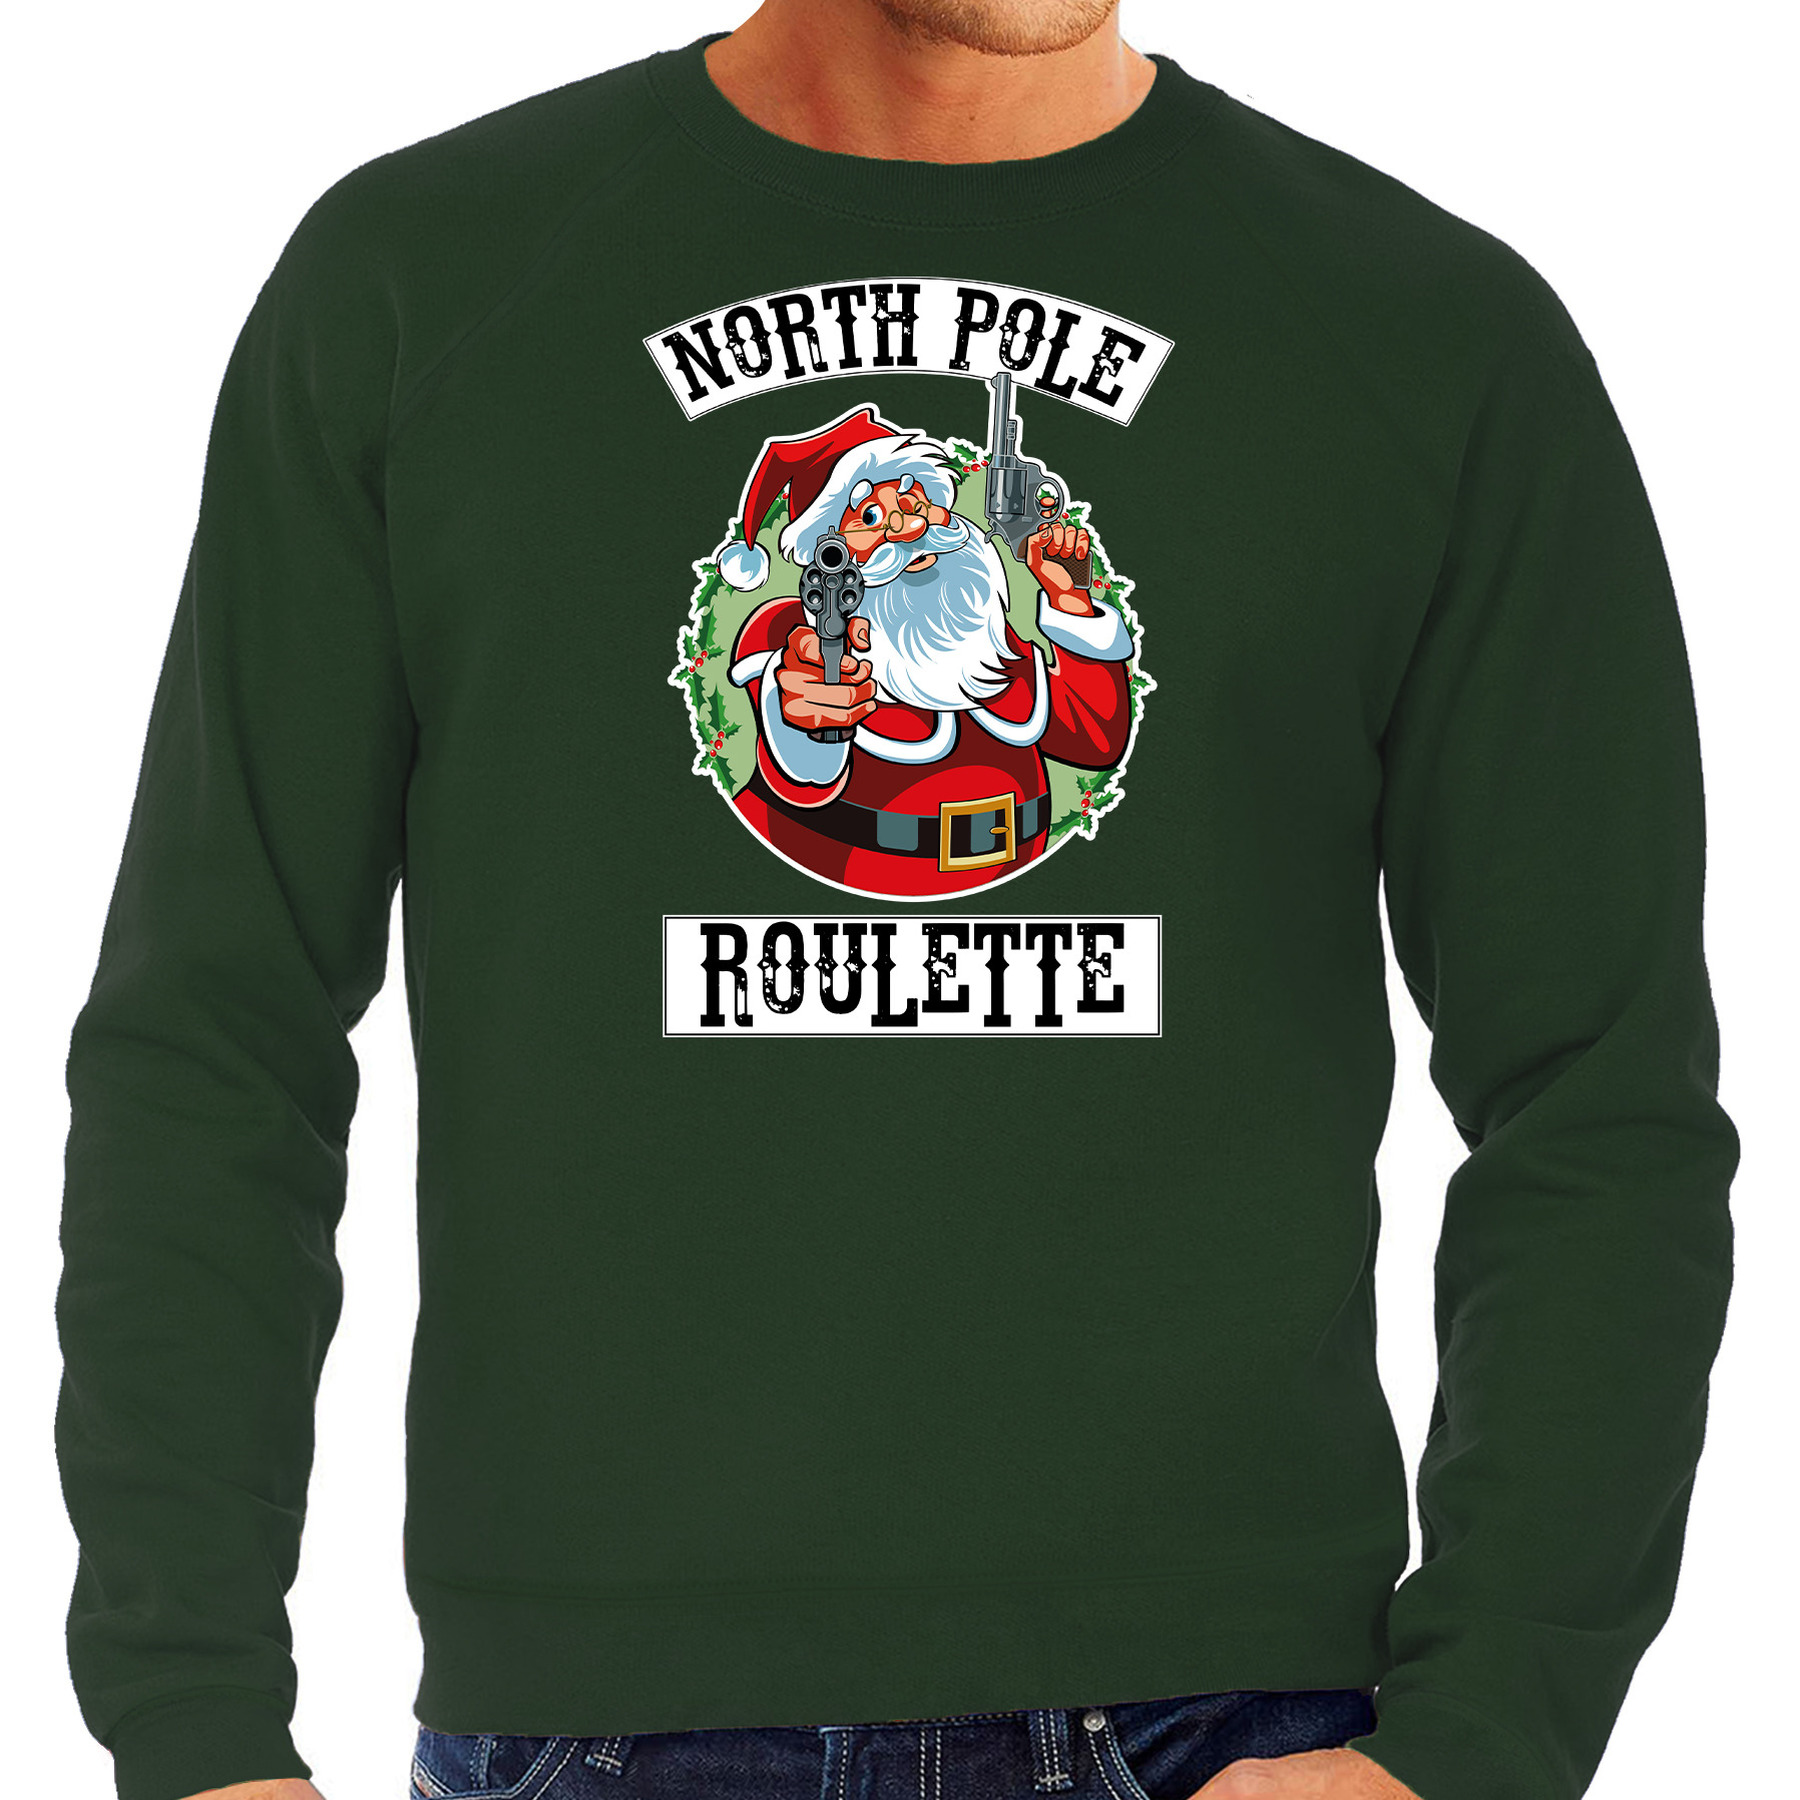 Grote maten foute kerstsweater / outfit northpole roulette groen voor heren. deze kerst sweater / trui is ...